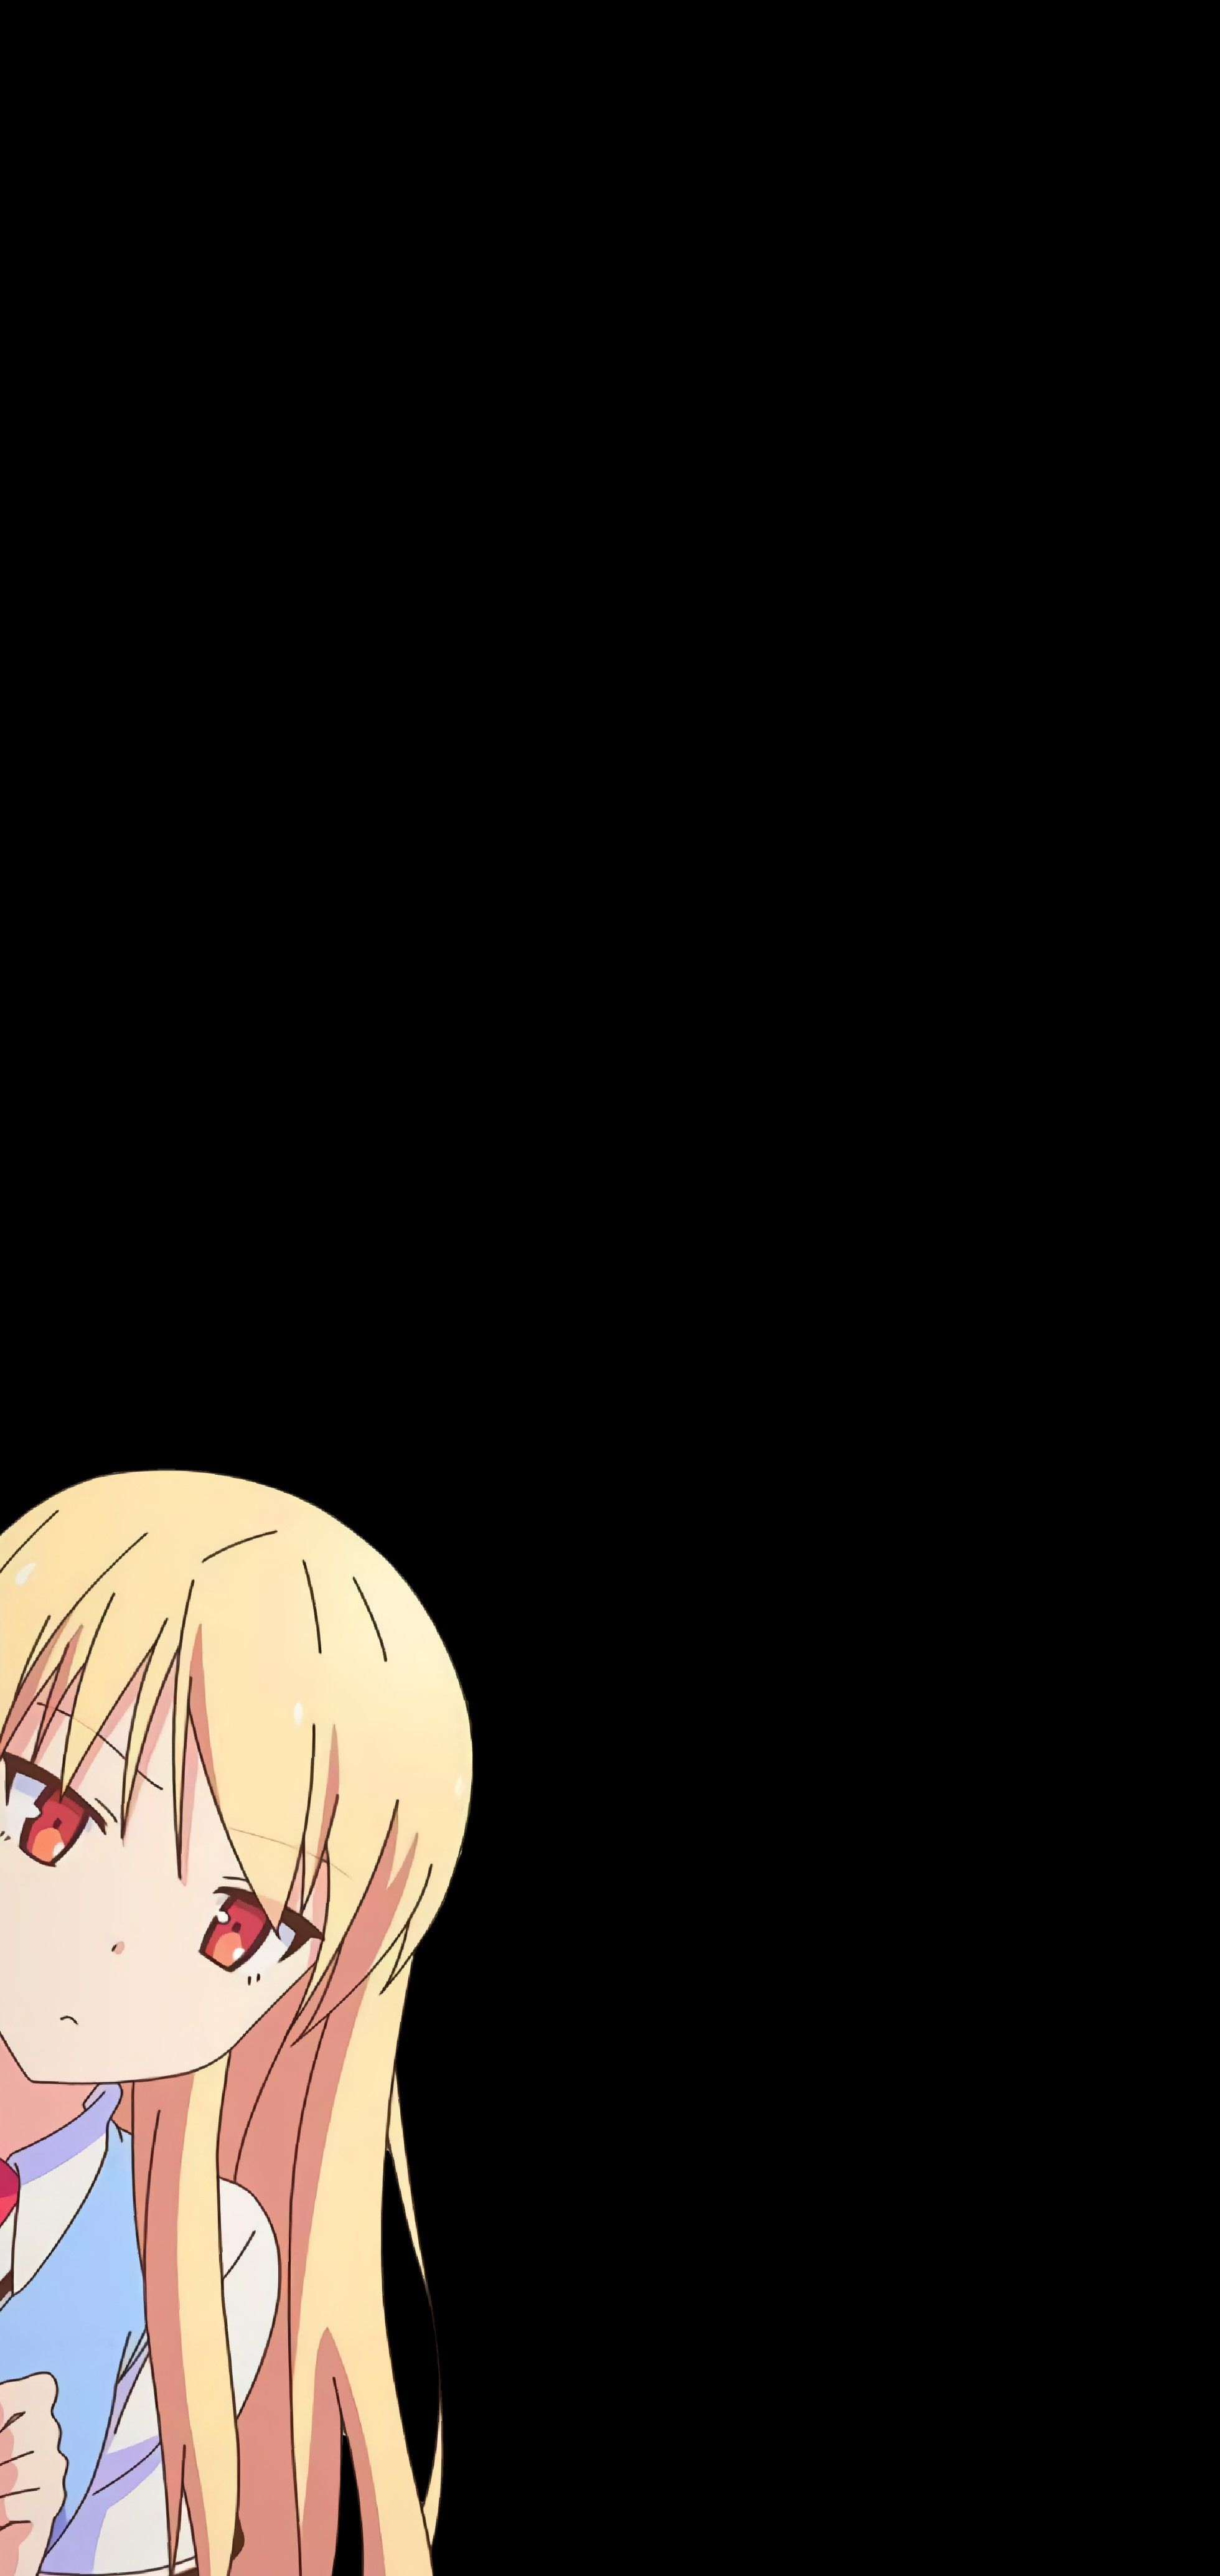 A wallpaper for Mashiro (credits to the owner, all I did was erase the background) (shout out to OLED users!)